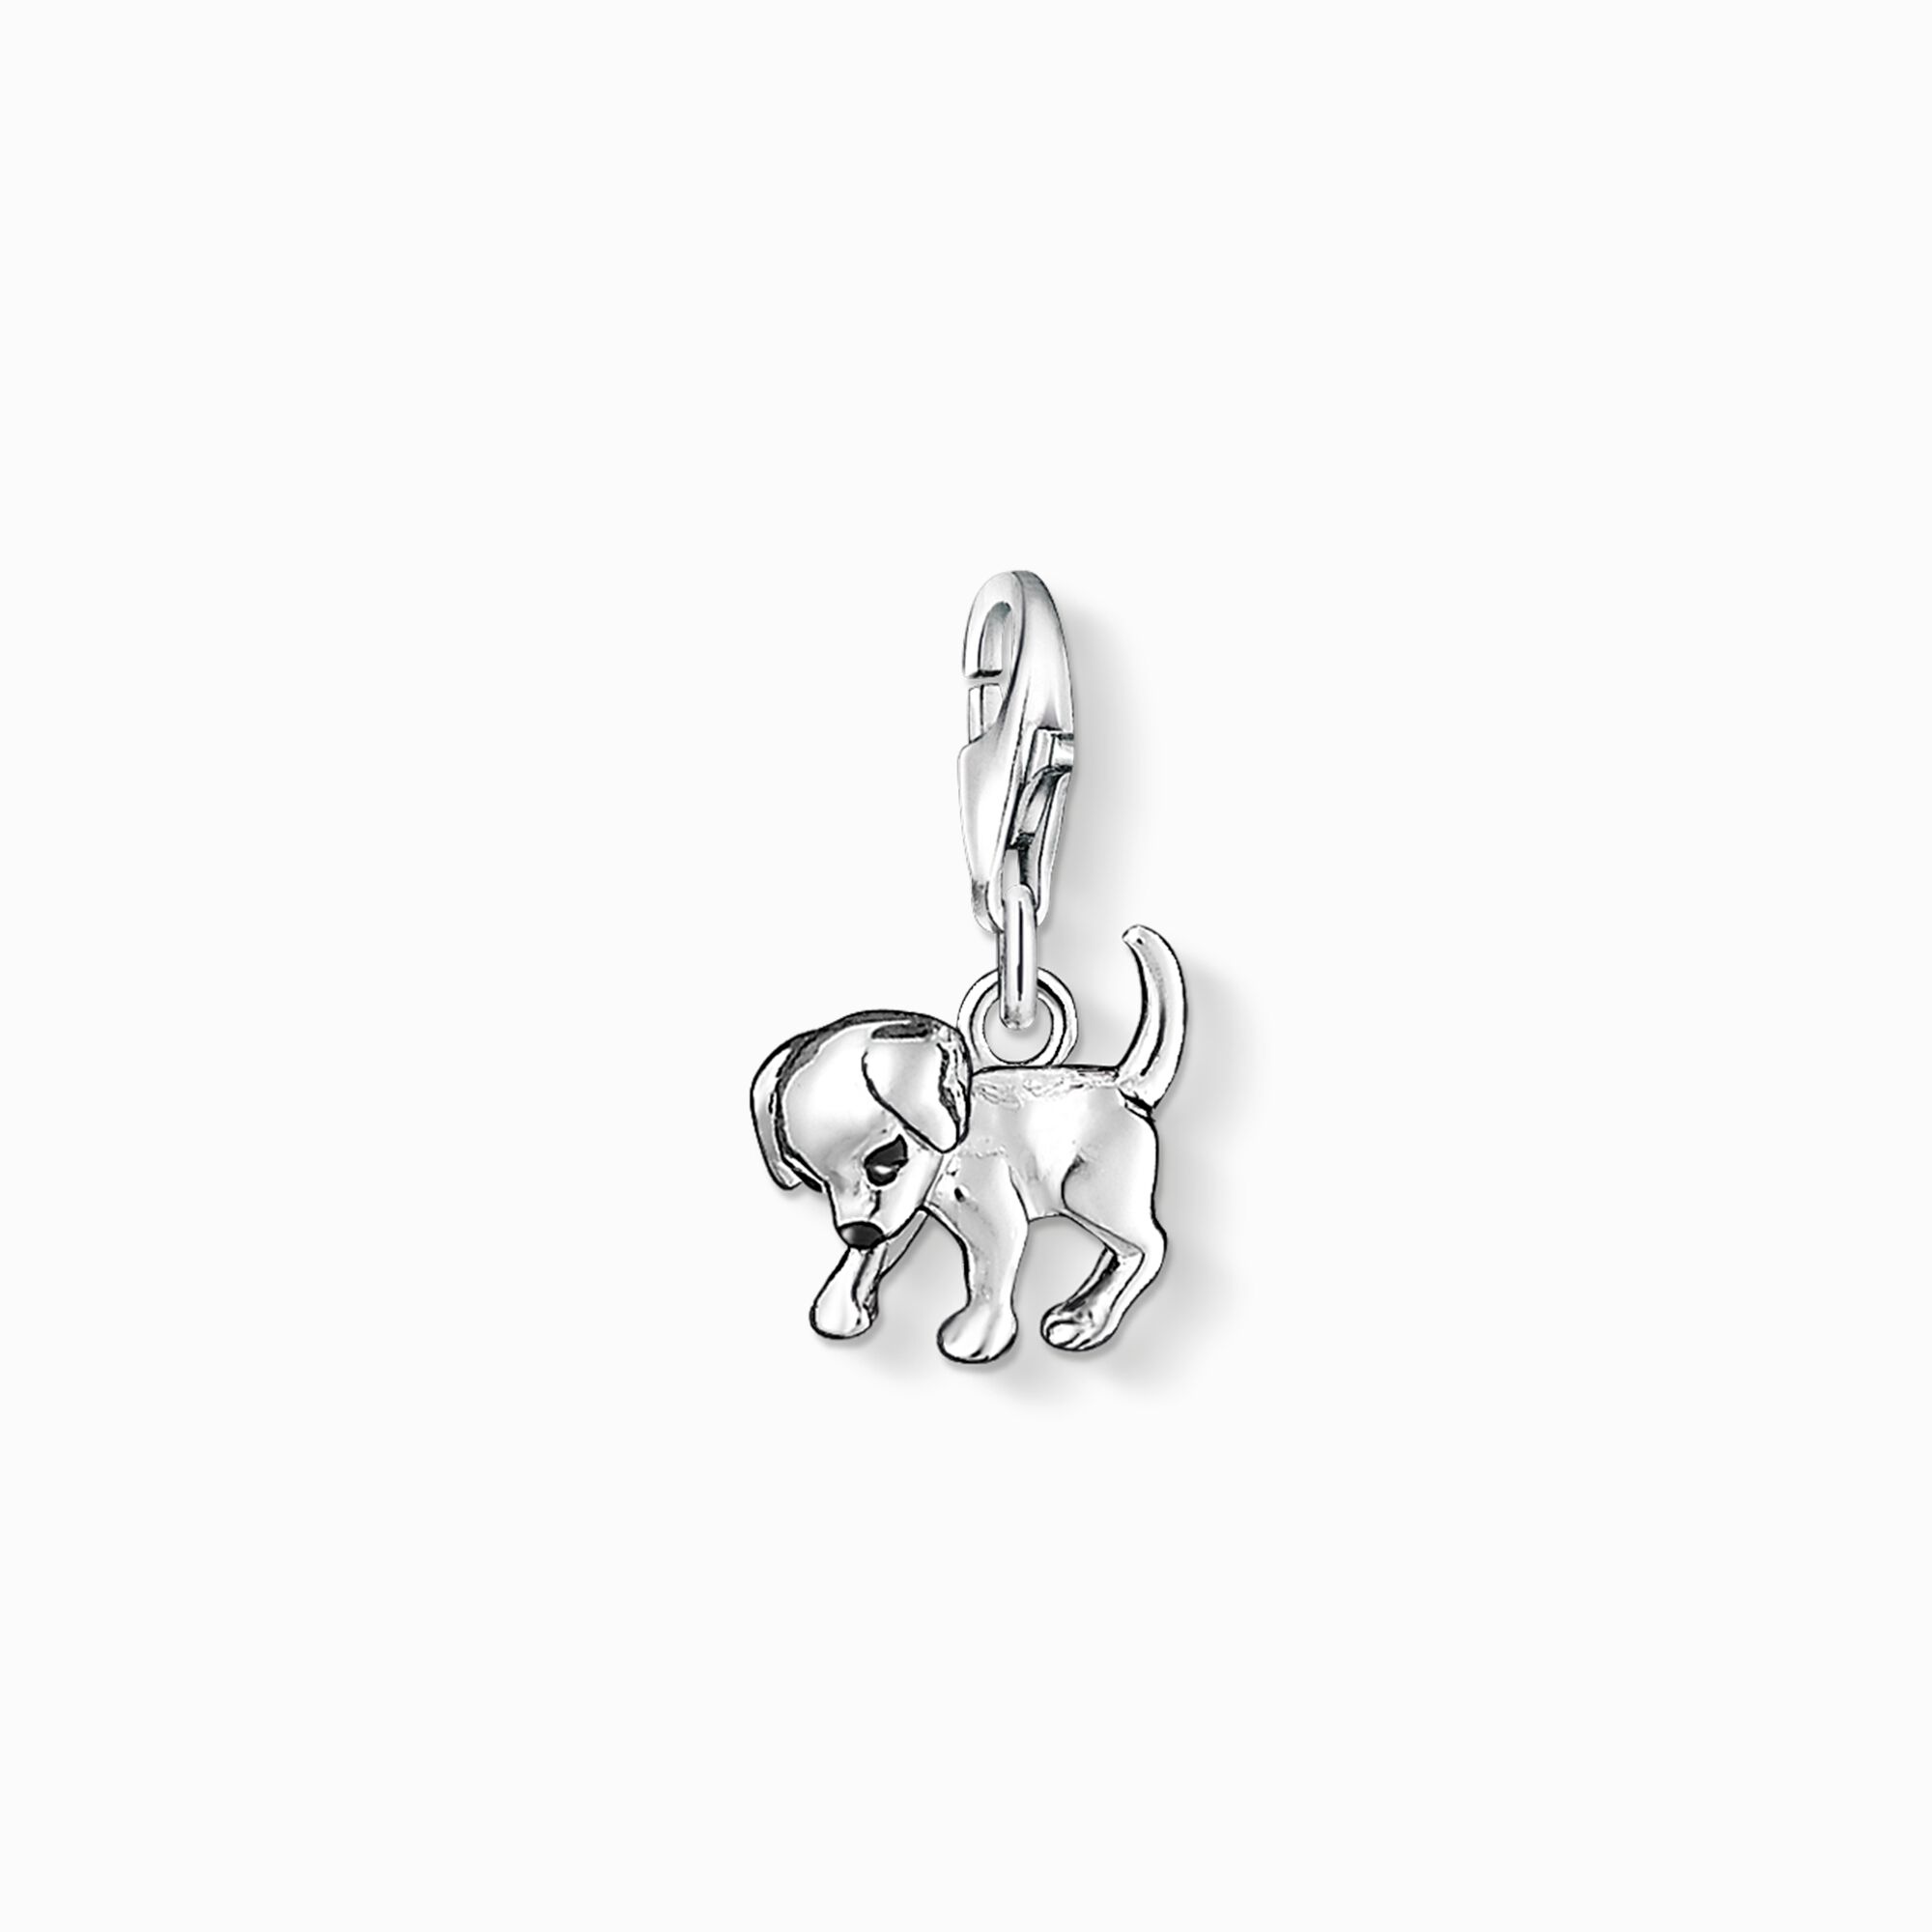 Charm pendant puppy from the Charm Club collection in the THOMAS SABO online store